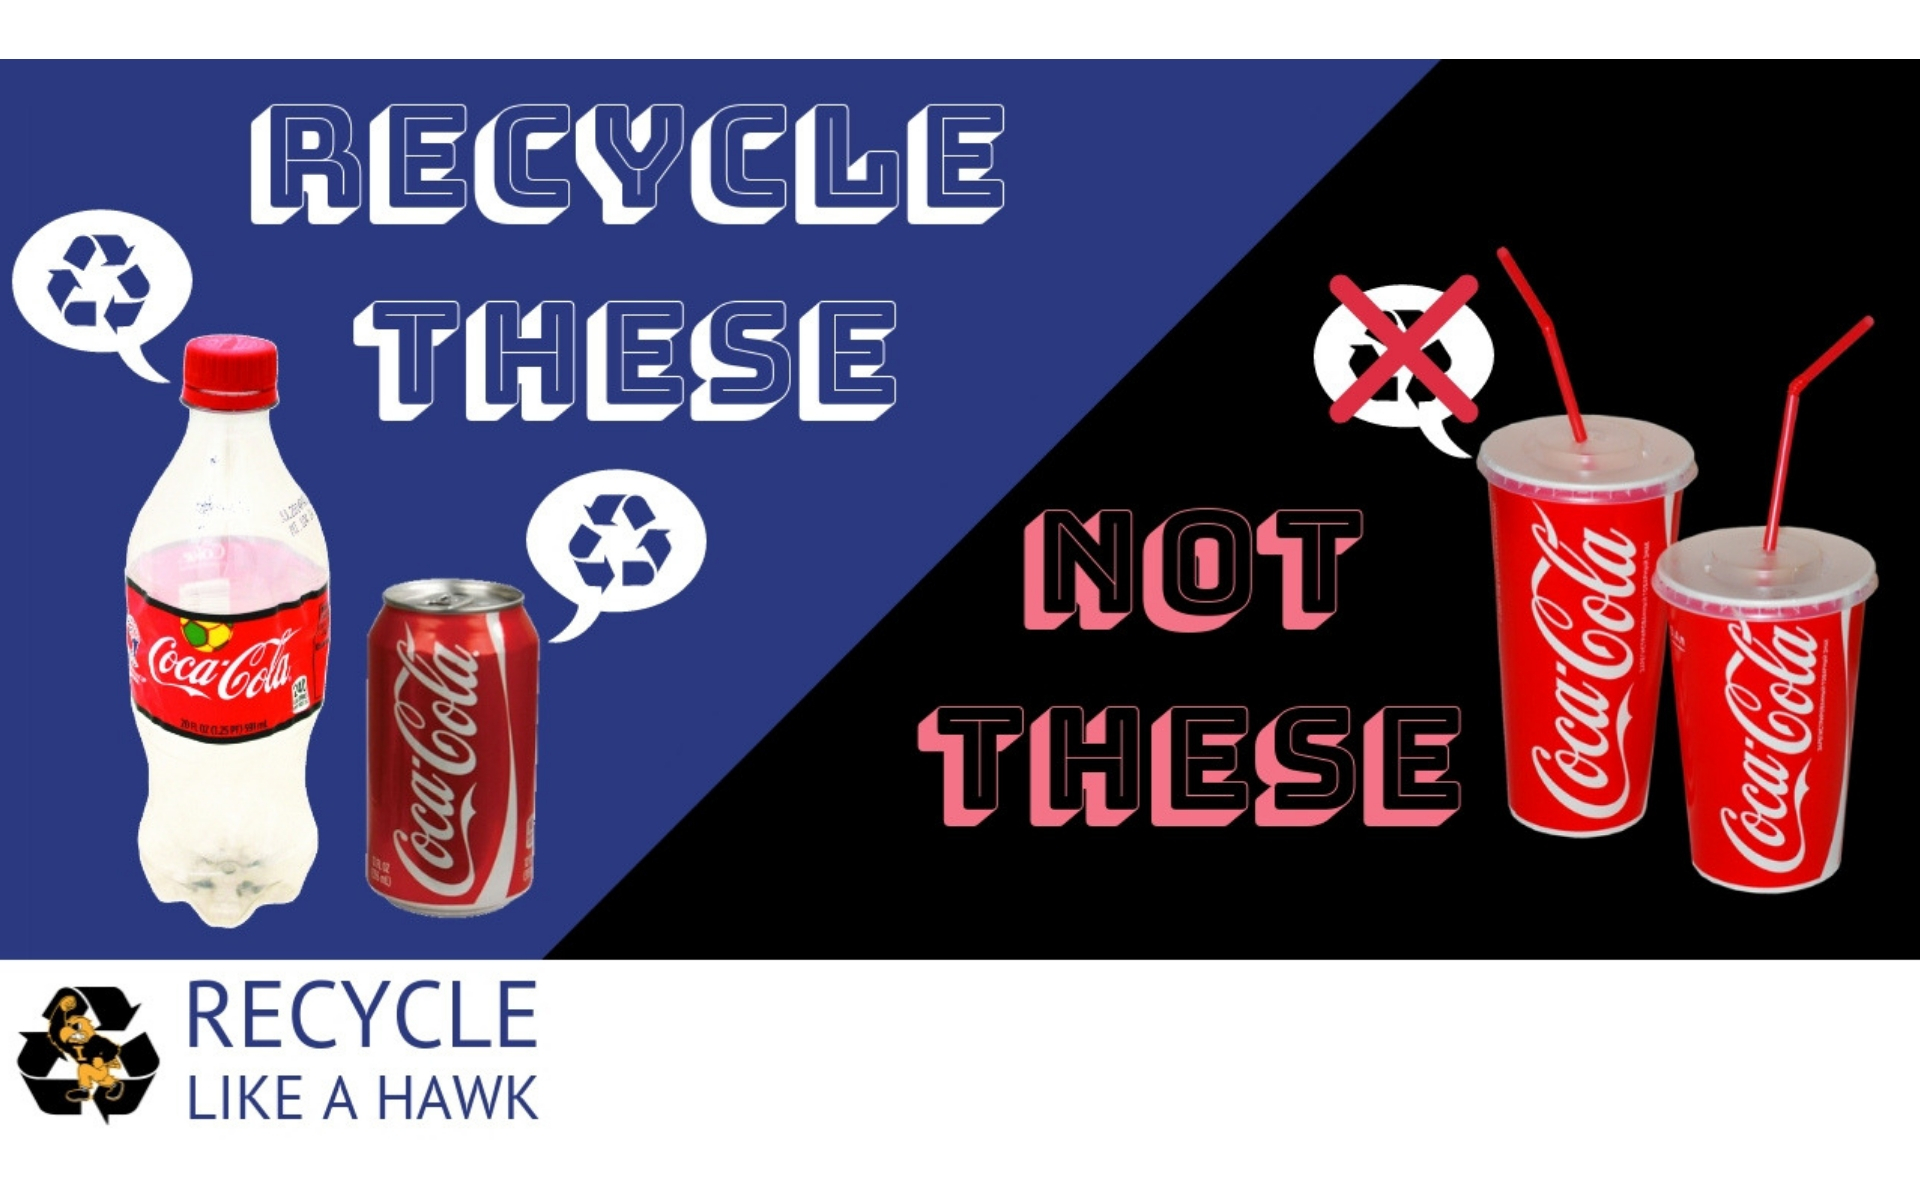 Plastic bottles and aluminum cans can be recycled anywhere on campus.  Just be sure to empty out any remaining liquid before recycling.  Disposable paper cups (and their lids and straws), are NOT recyclable and should go in the landfill (aka trash) bin.  Reduce your landfill waste by choosing beverages that come in recyclable containers.  Or, better yet, bring your own reusable container for refills.